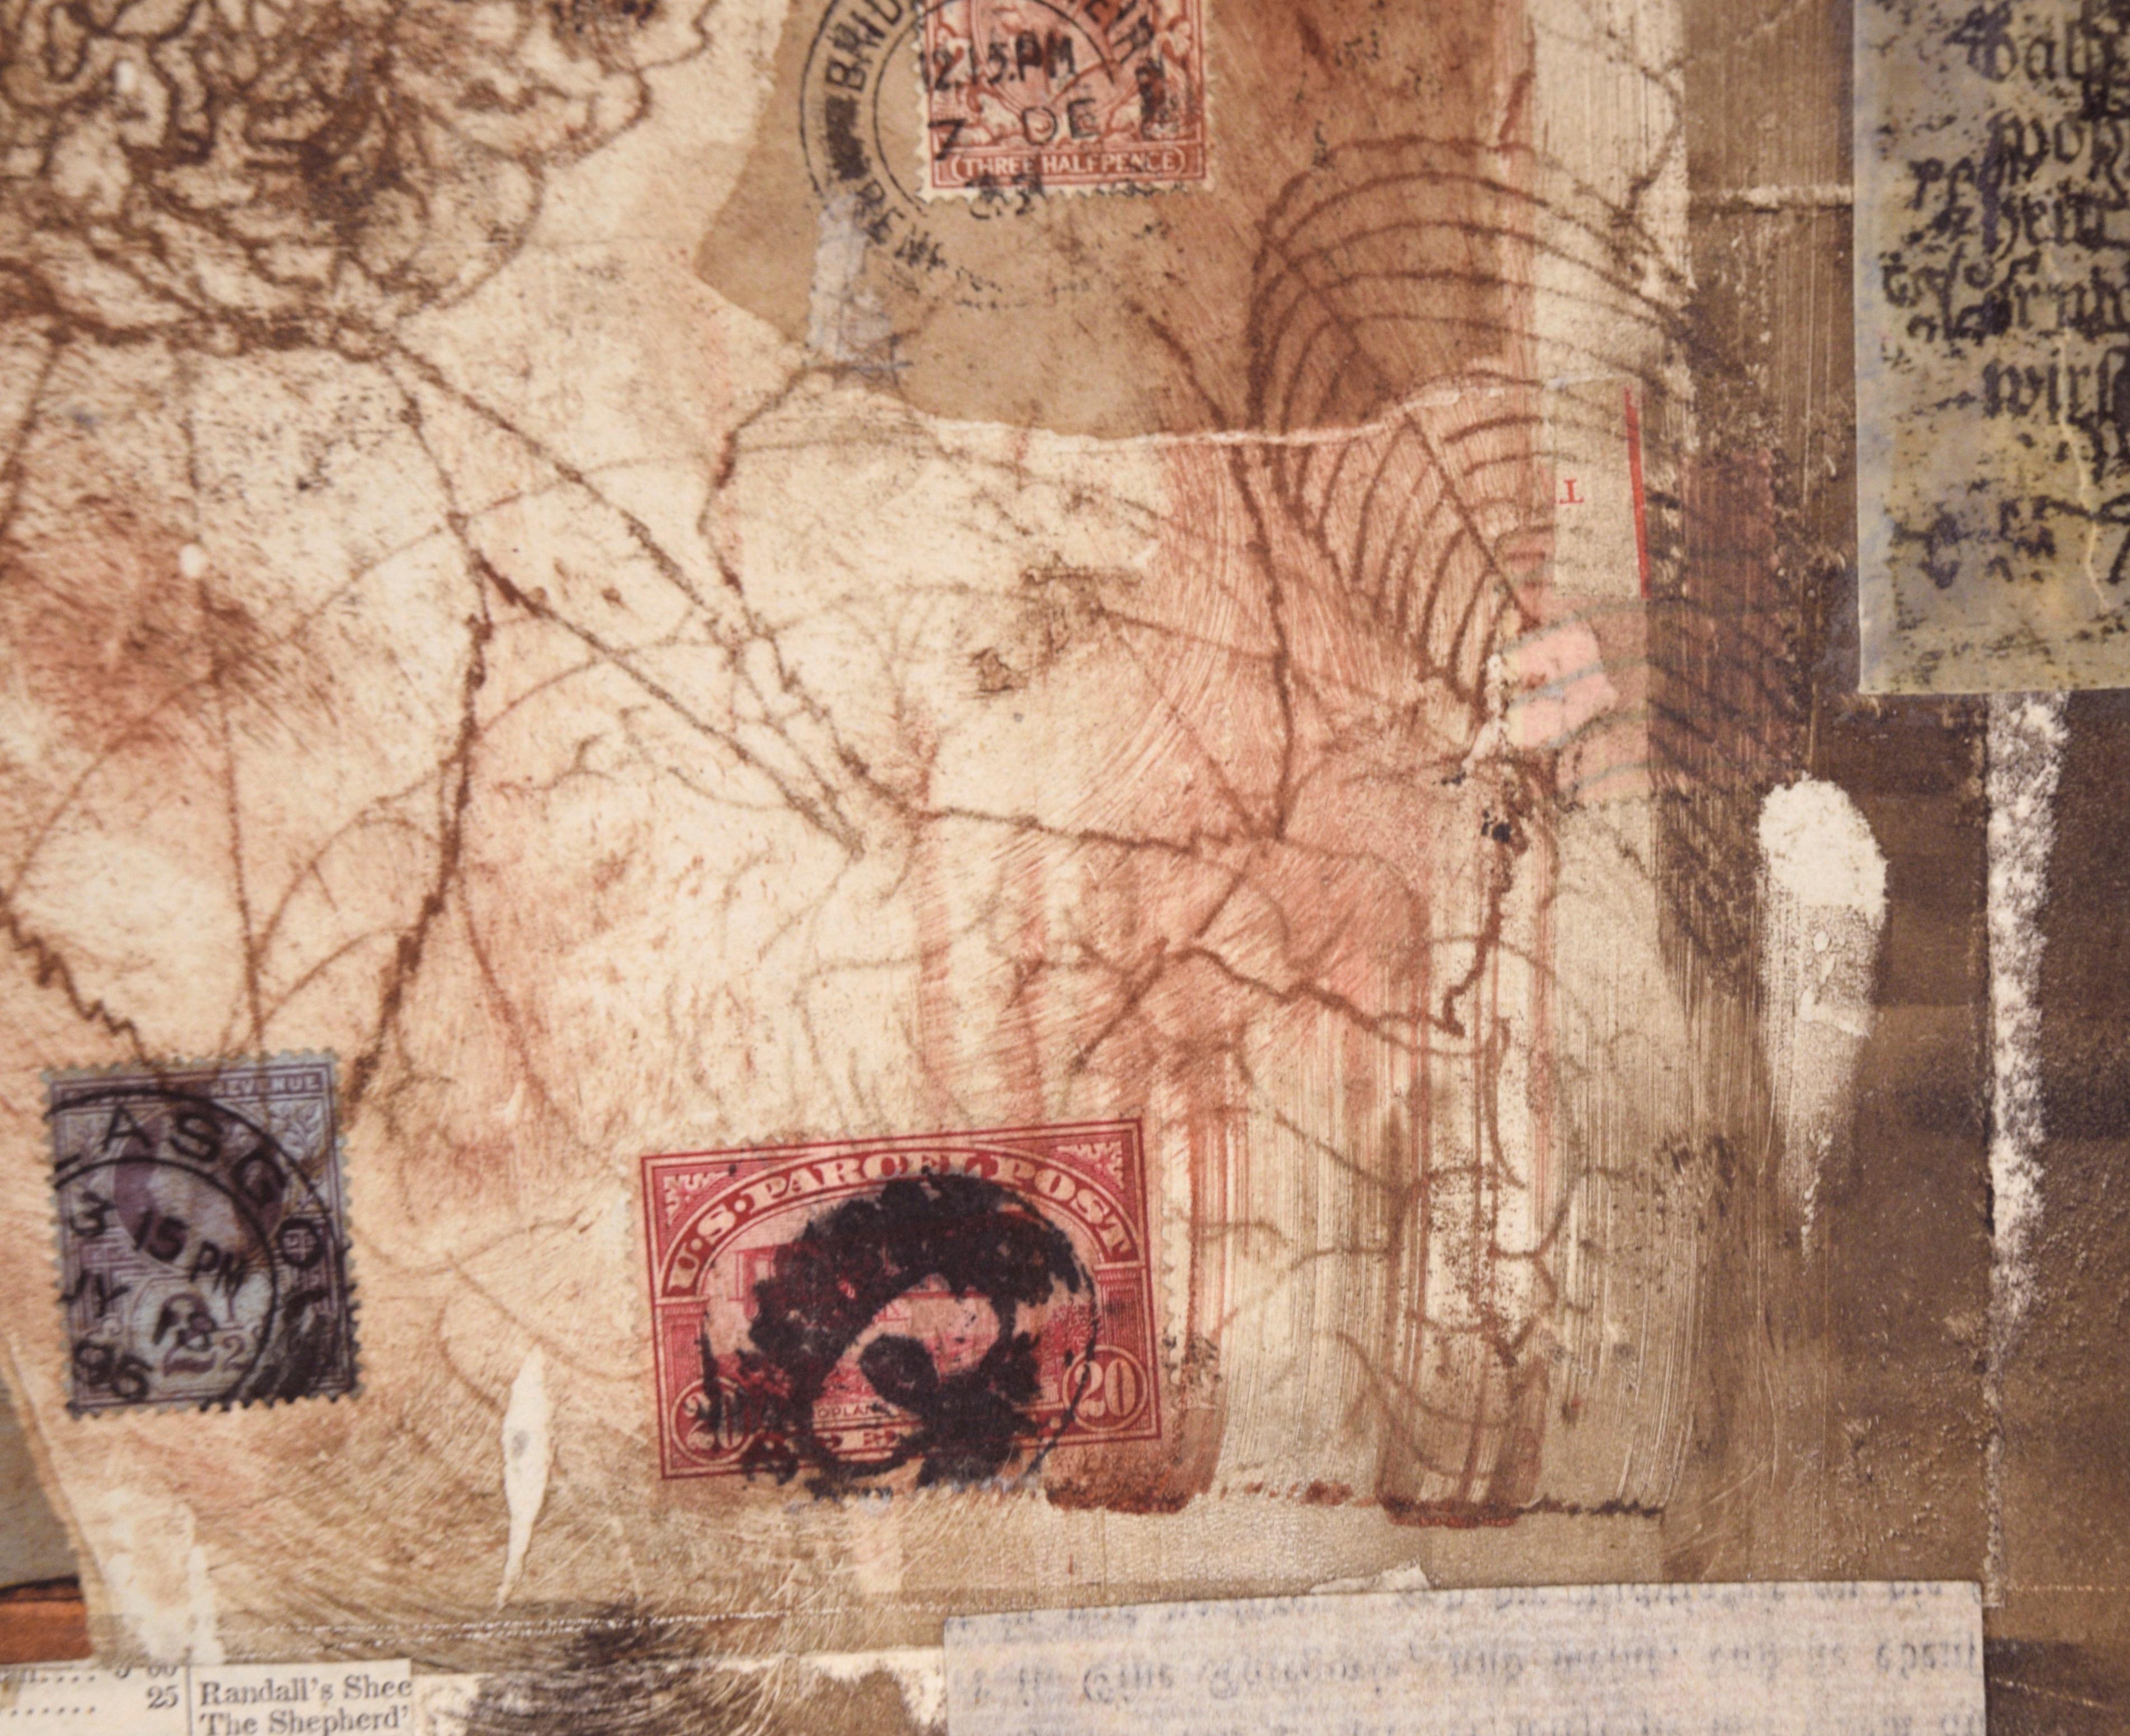 Abstract monoprint by Michael Pauker (American, b. 1957). This piece is made from several layers of collage, including stamps and pages from old books and manuscripts. Atop the collage is a chine colle monoprint, adding a layer of depth.

Signed in